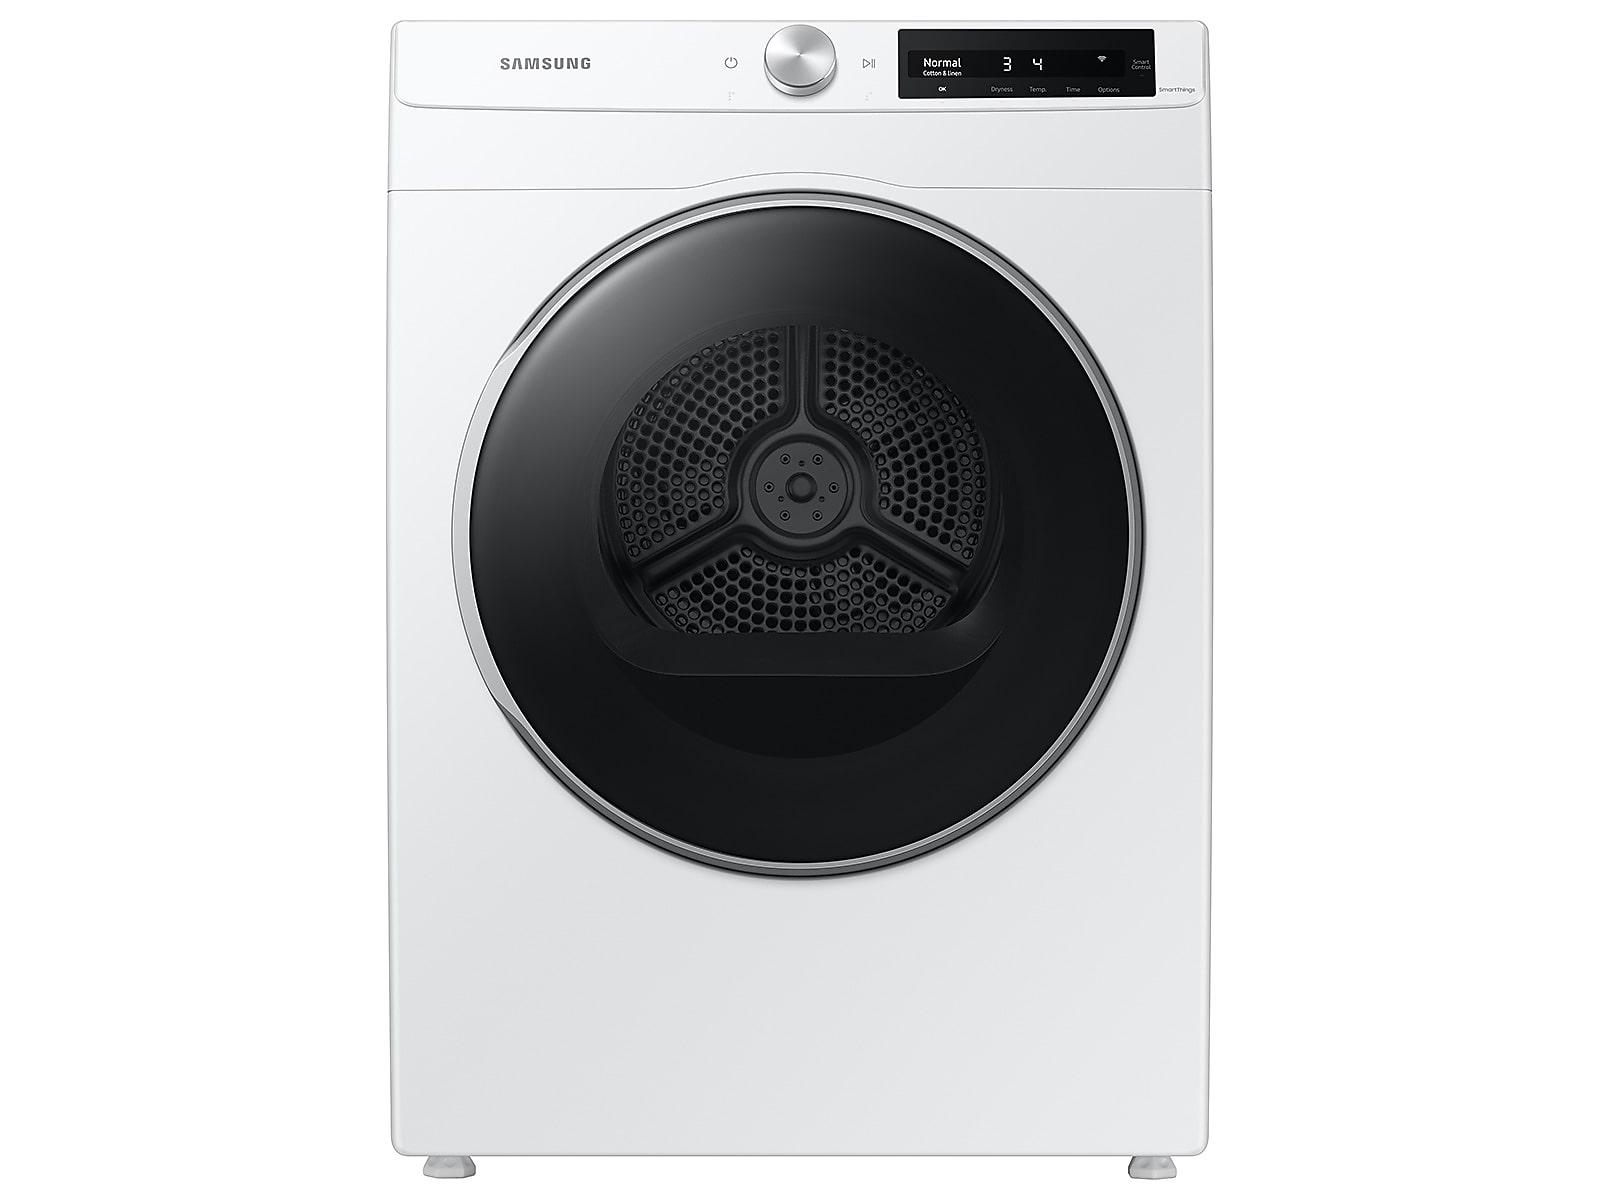 Samsung 4.0 cu. ft. Electric Dryer with AI Smart Dial and Wi-Fi Connectivity in White(DV25B6900EW/A2)